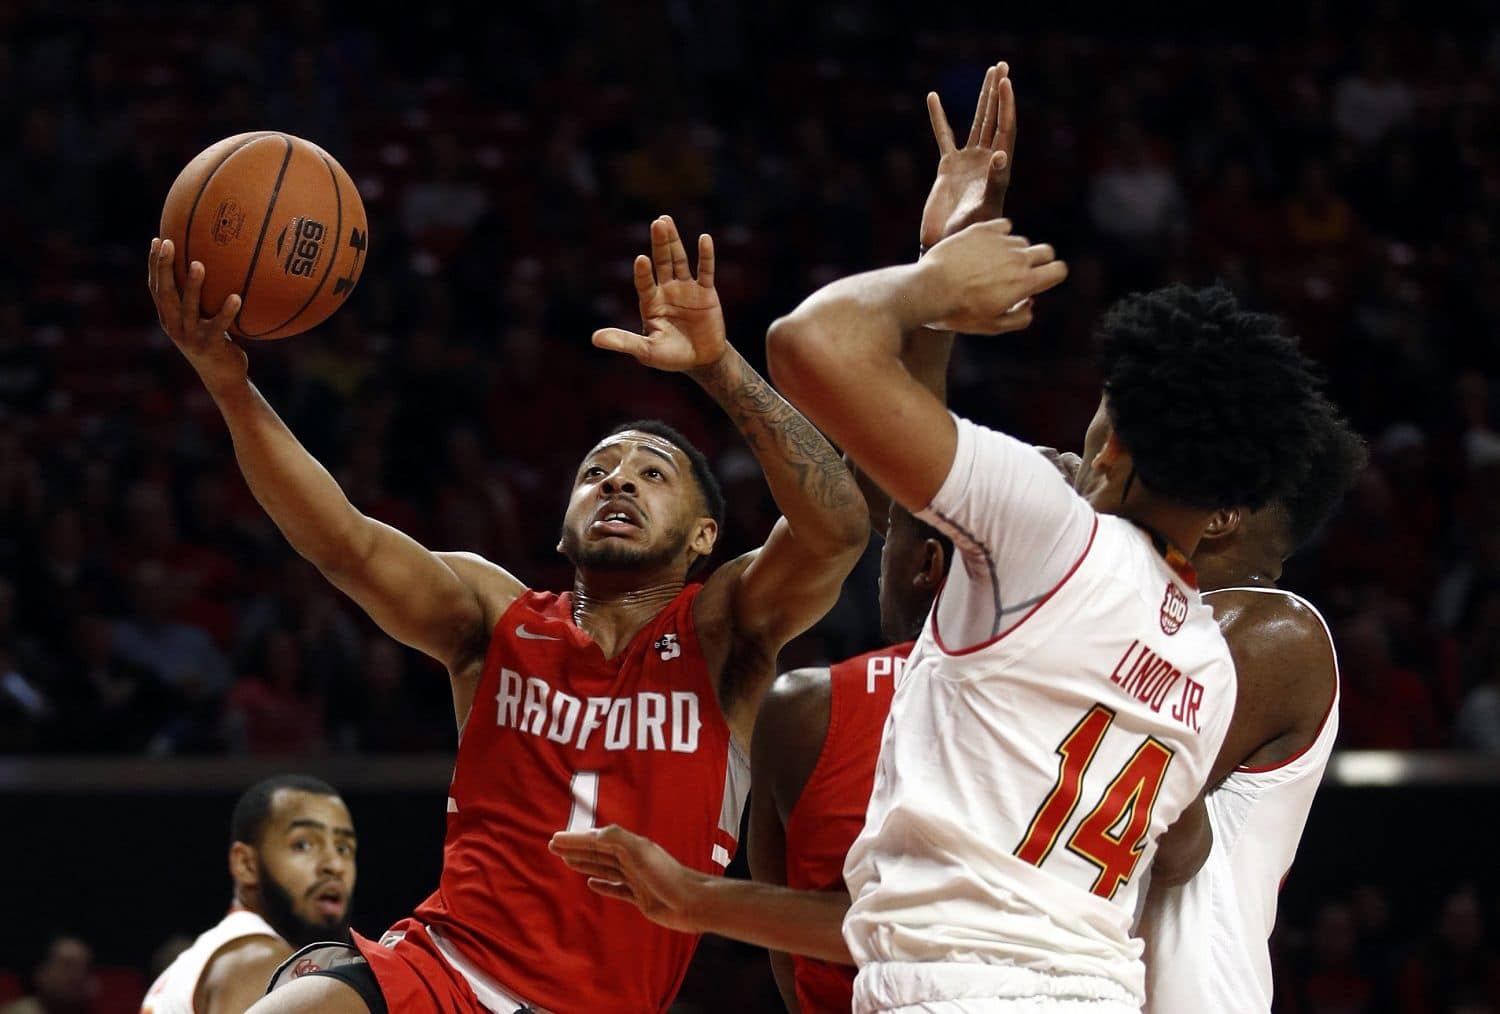 Radford guard Carlik Jones, left, shoots over Maryland forward Ricky Lindo Jr. (14) in the first half of an NCAA college basketball game, Saturday, Dec. 29, 2018, in College Park, Md. (AP Photo/Patrick Semansky)